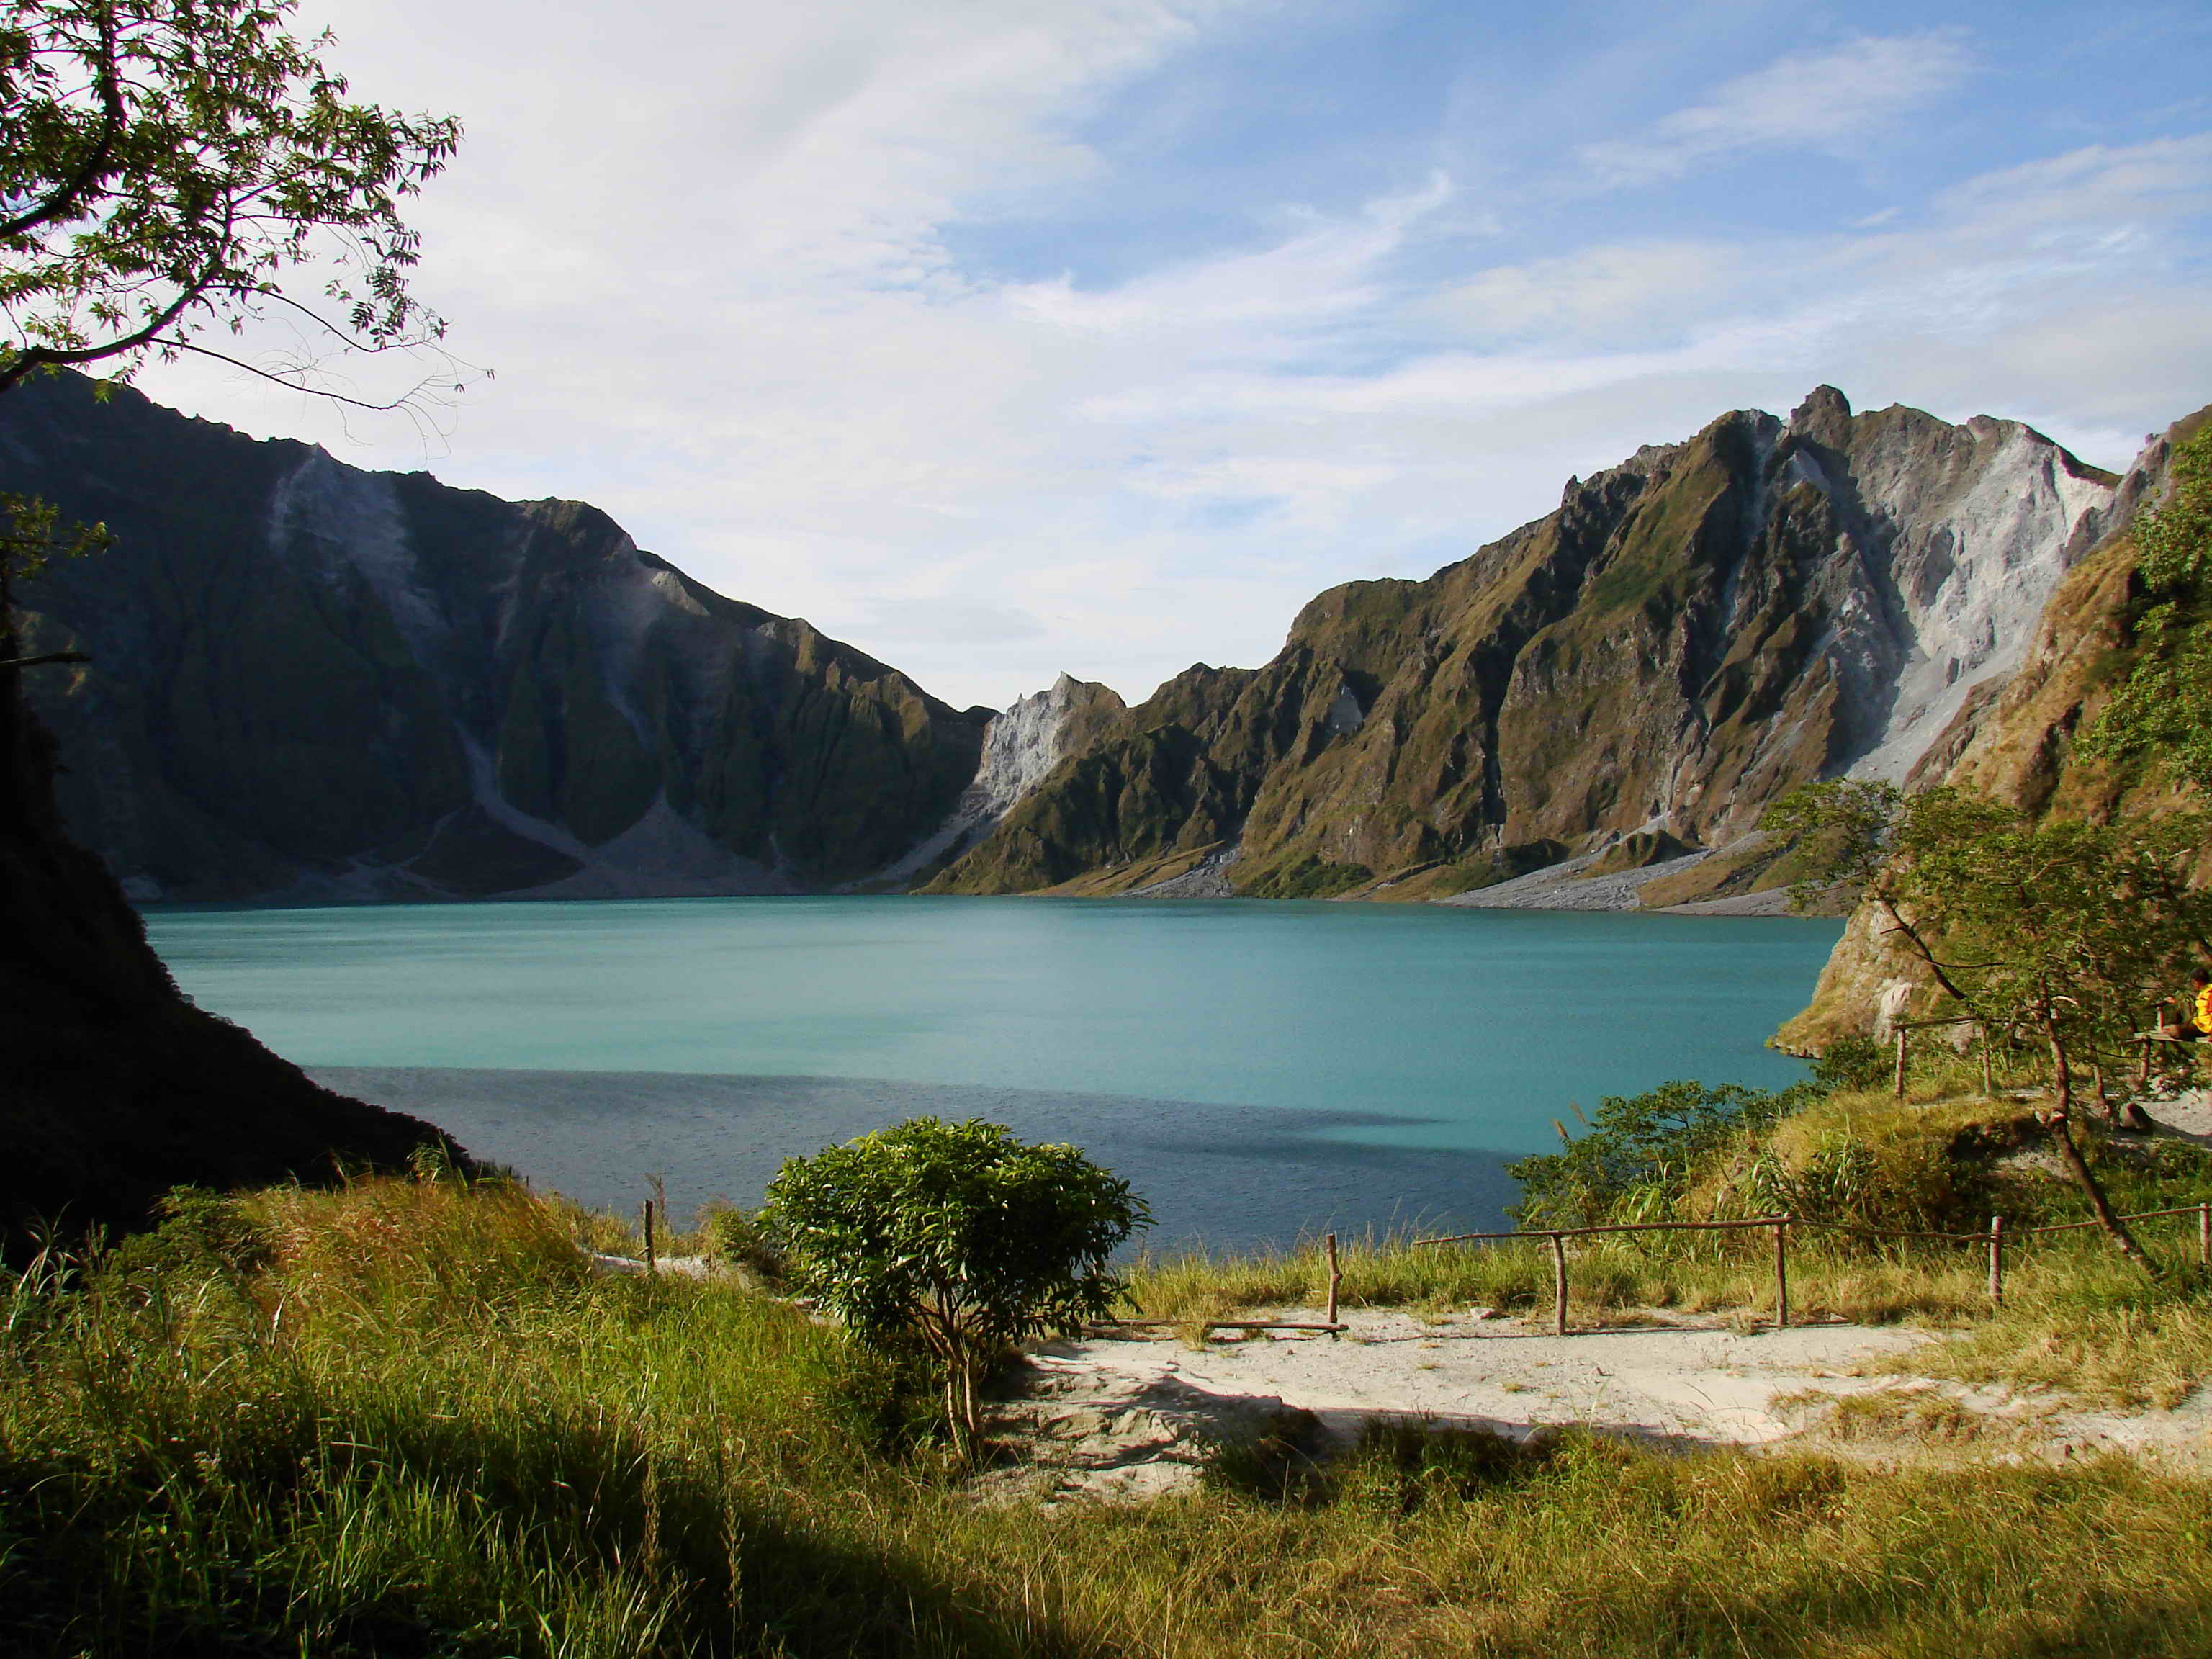 Mount Pinatubo's crater lake formed as a result of the cataclysmic eruption in 1991 (Source: Wikipedia)